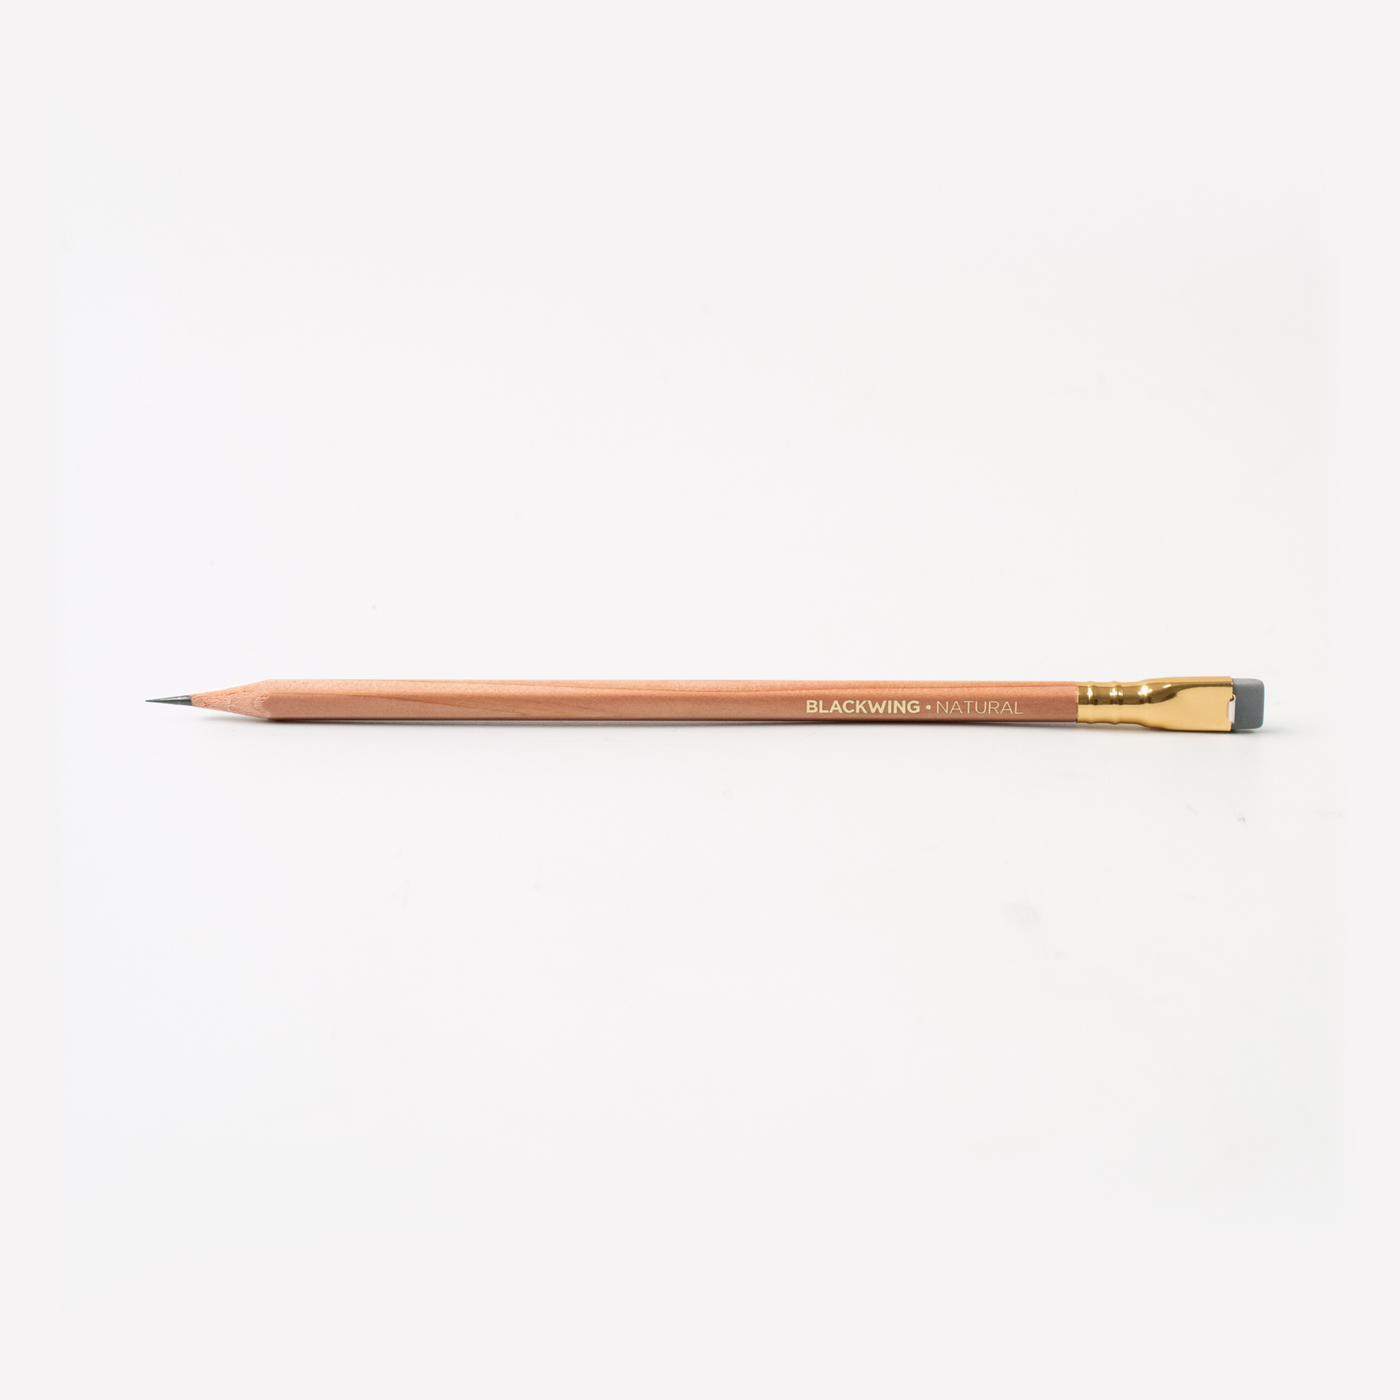 Single Blackwing Pencil - Natural (Extra Firm Graphite)